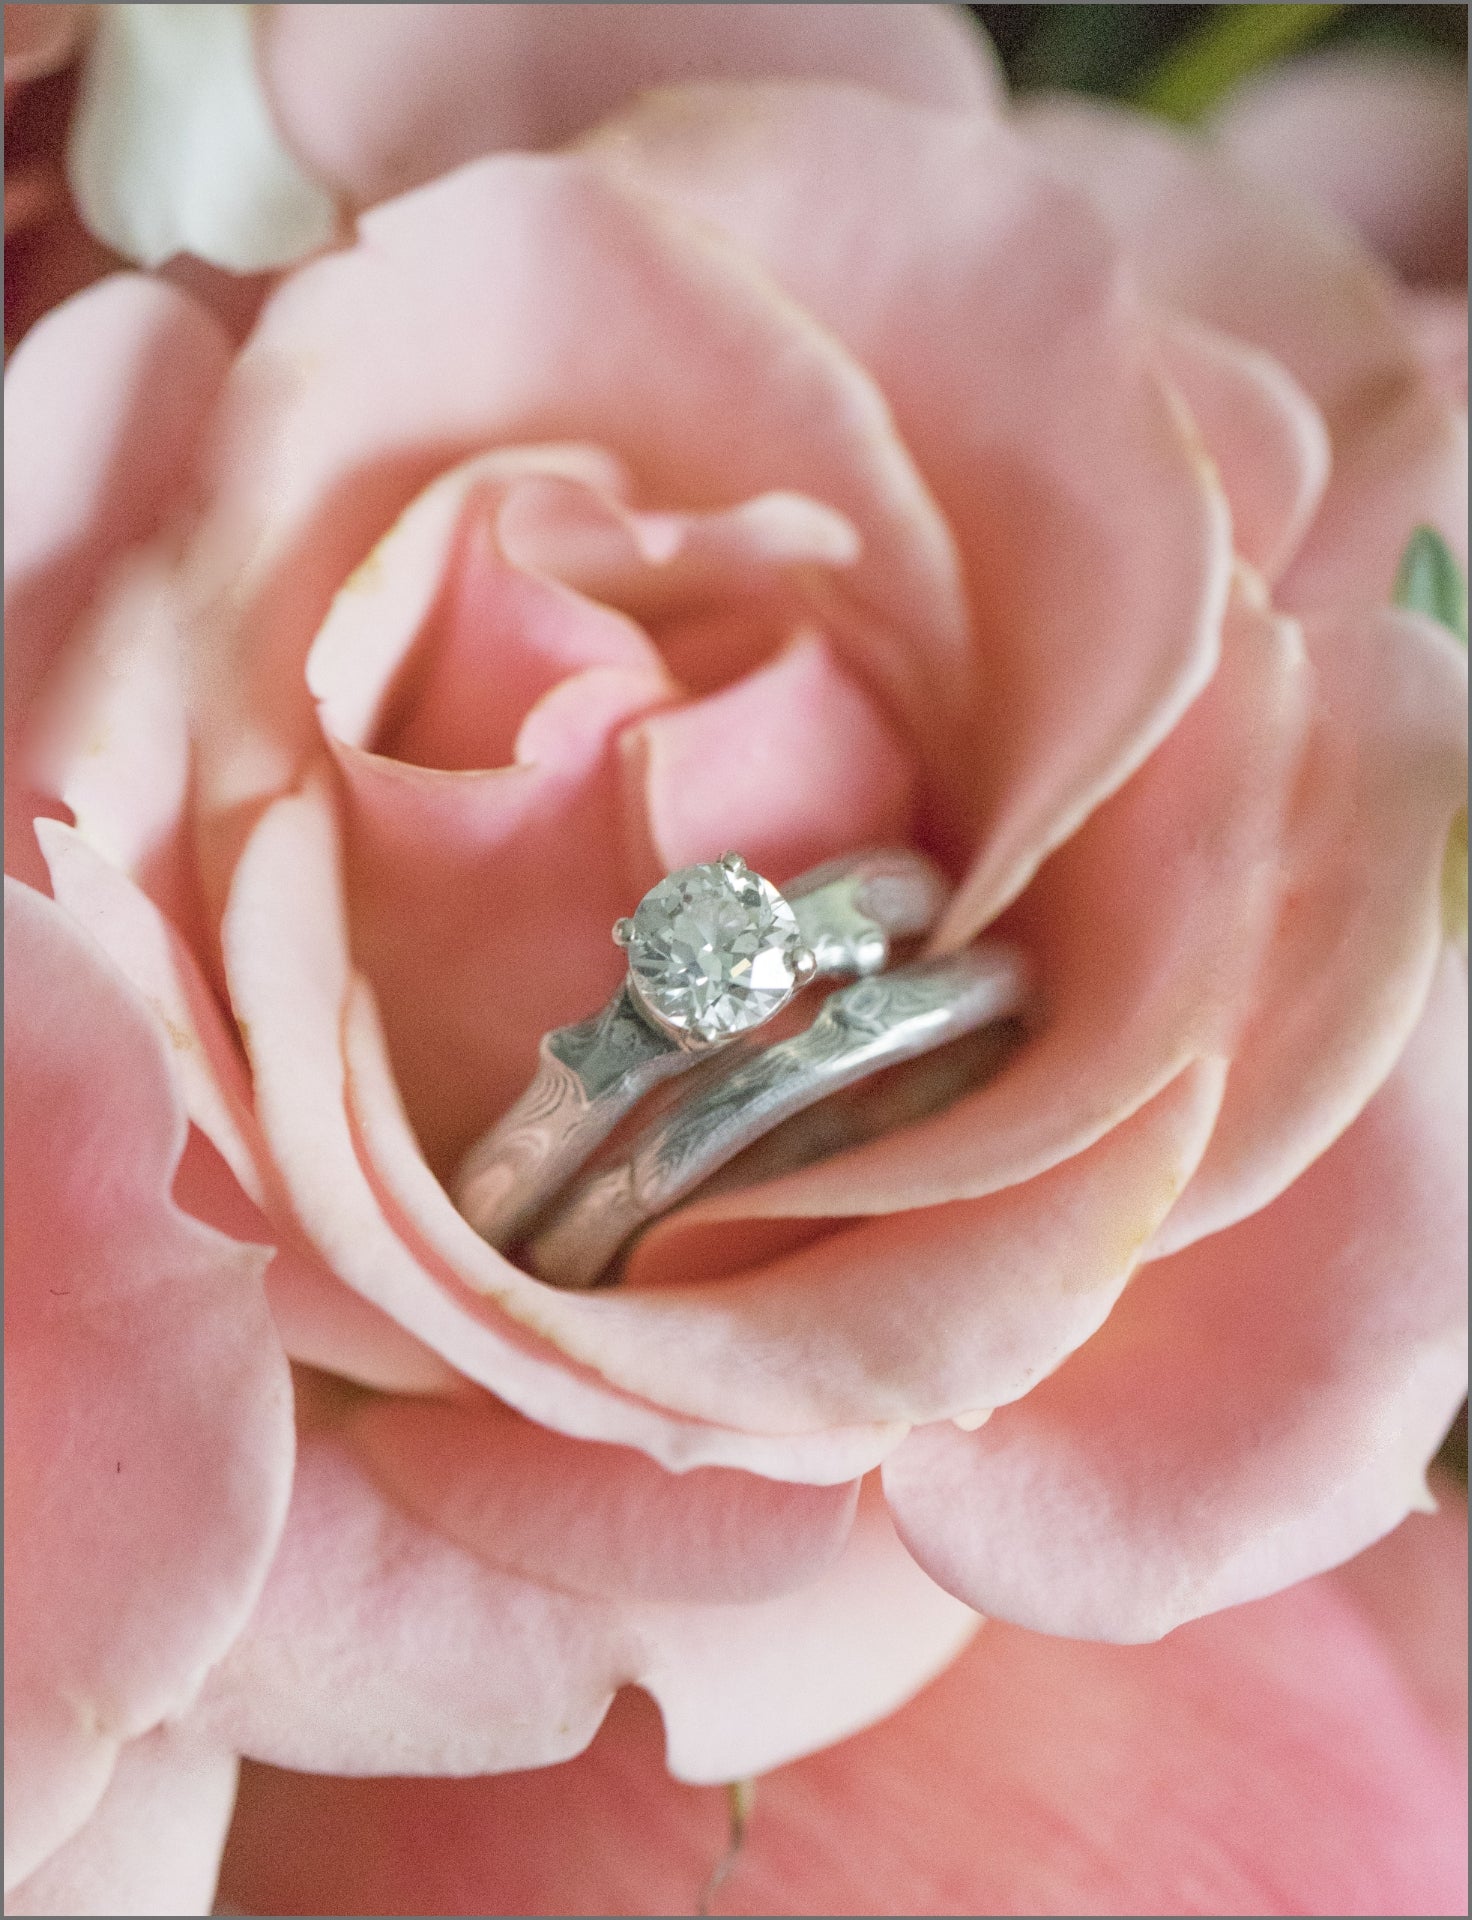 A silver diamond ring and a silver band sat inside a pink rose. These rings were designed and crafted by W.R. Metalarts who prioritise ethical and sustainable business practices in bringing bespoke and beautiful jewelry to their clients.